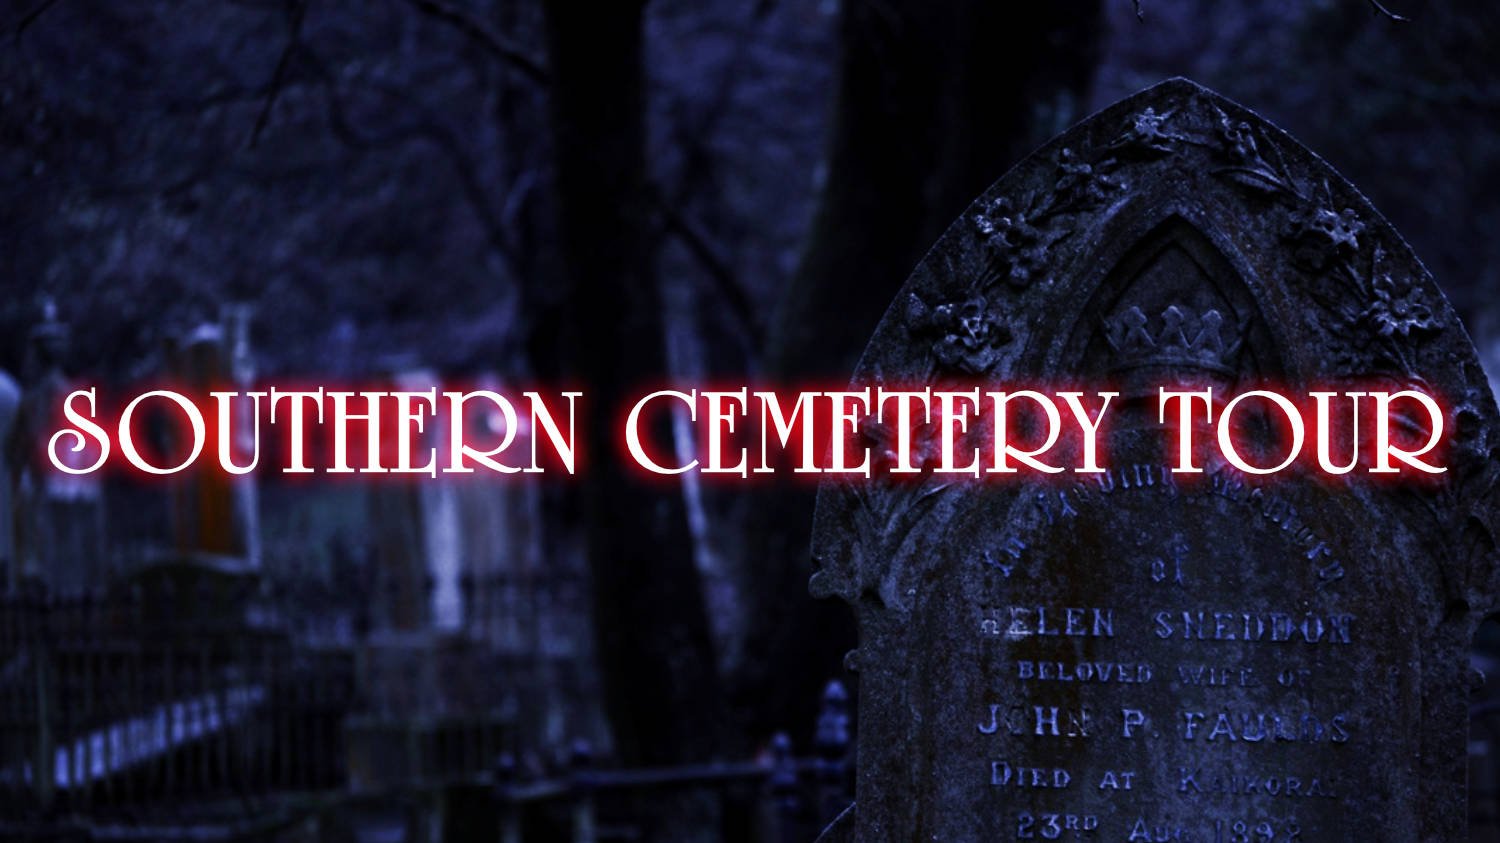 The-Southern-Cemetery-Tour-Gallery.jpg